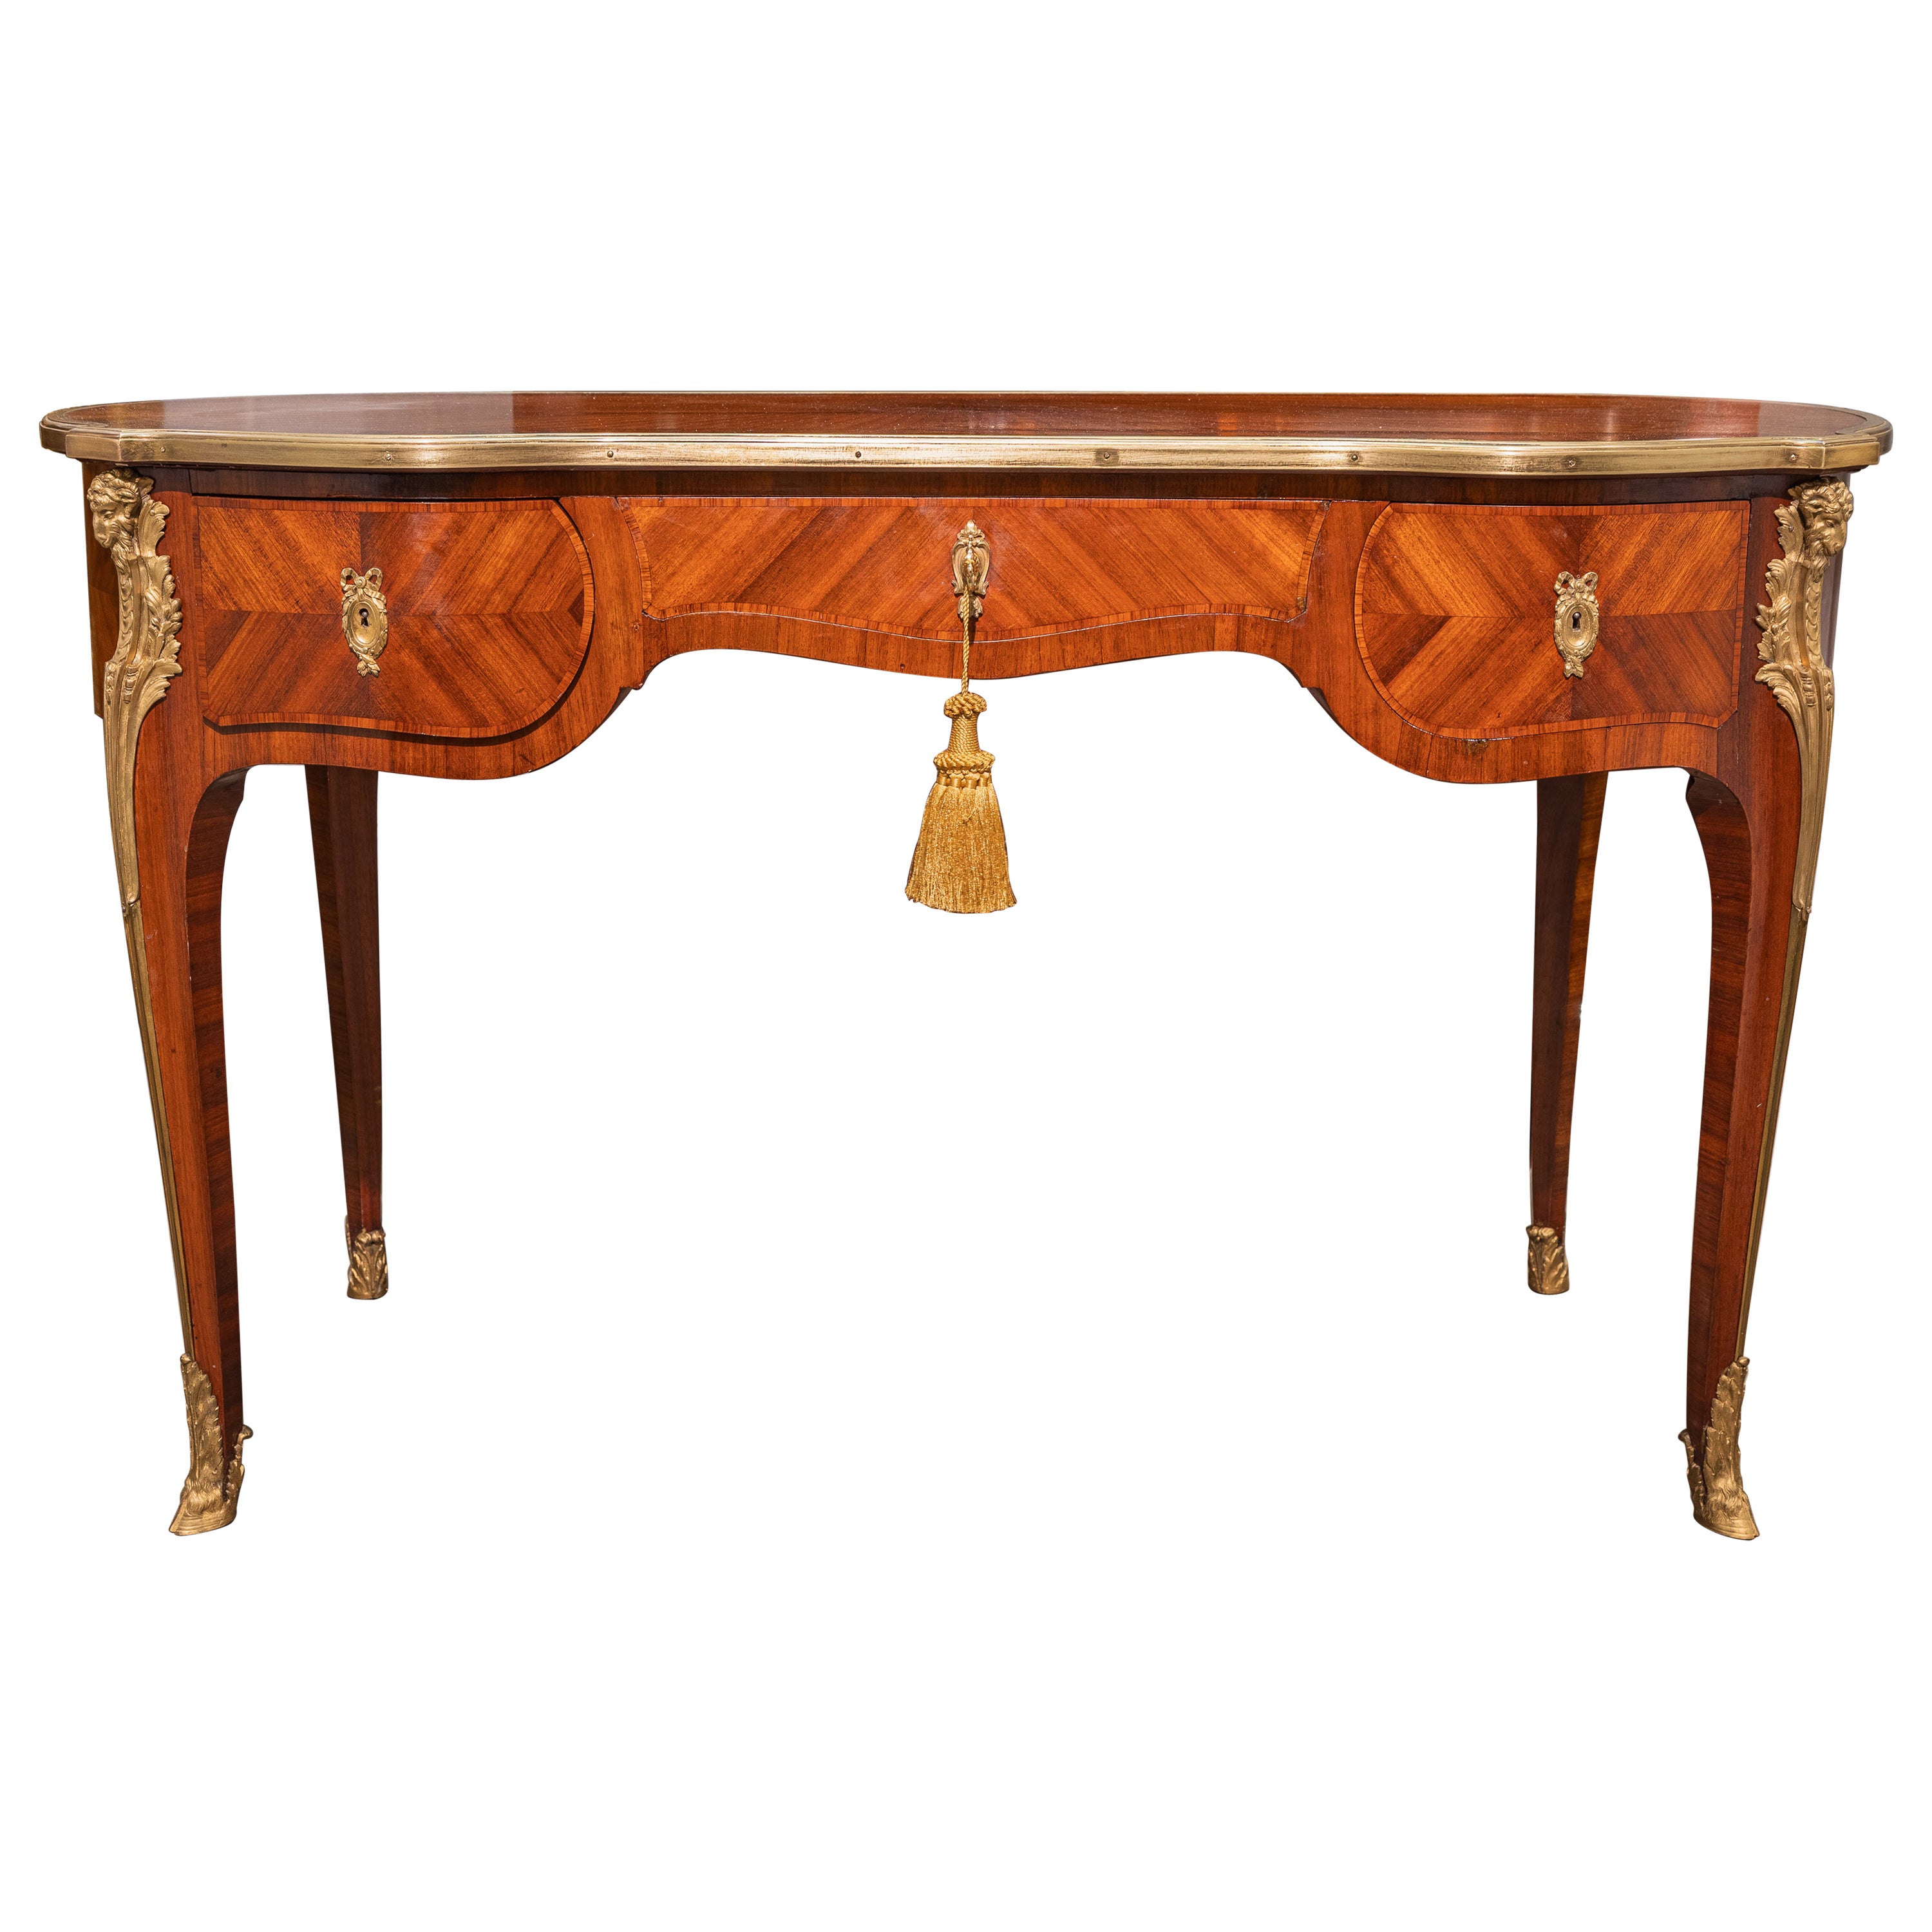 A fine 19th century French Louis XVI writing desk signed by Maison Krieger